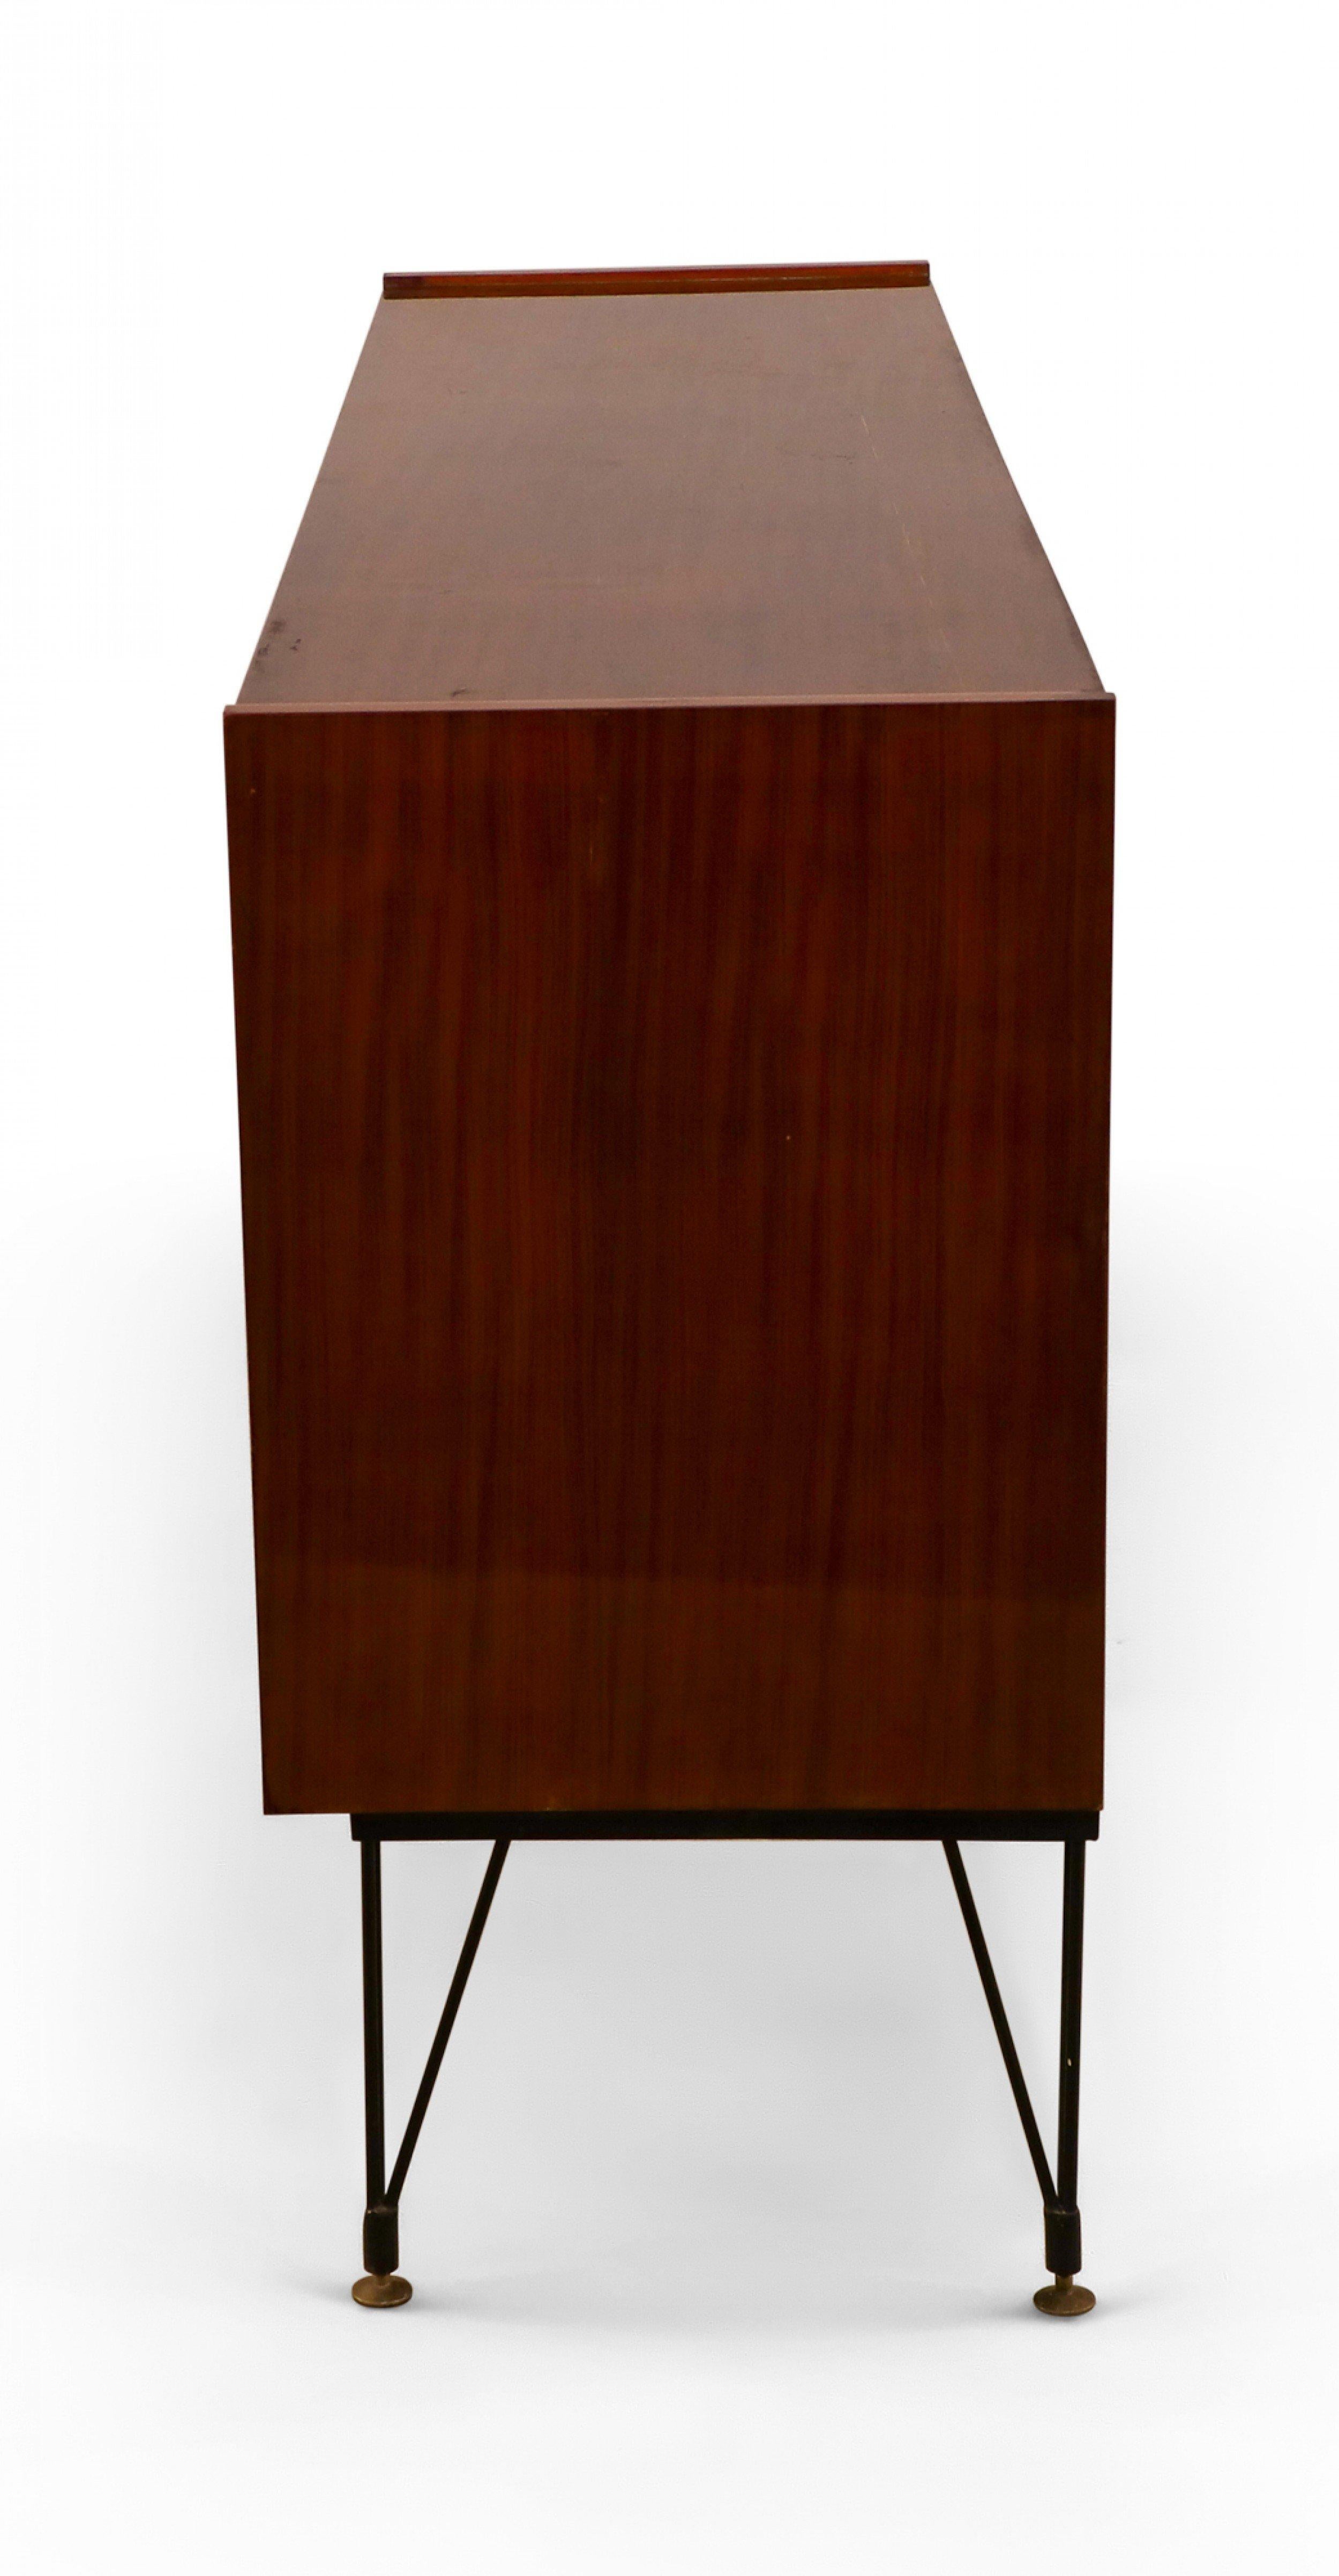 Mid-Century Modern Italian mahogany sideboard with a striped veneer exterior, 4 cabinet doors, brass handles, and a center cabinet with a mosaic mirrored interior with a brass pull that becomes a leg, and 6 black metal hairpin legs with brass